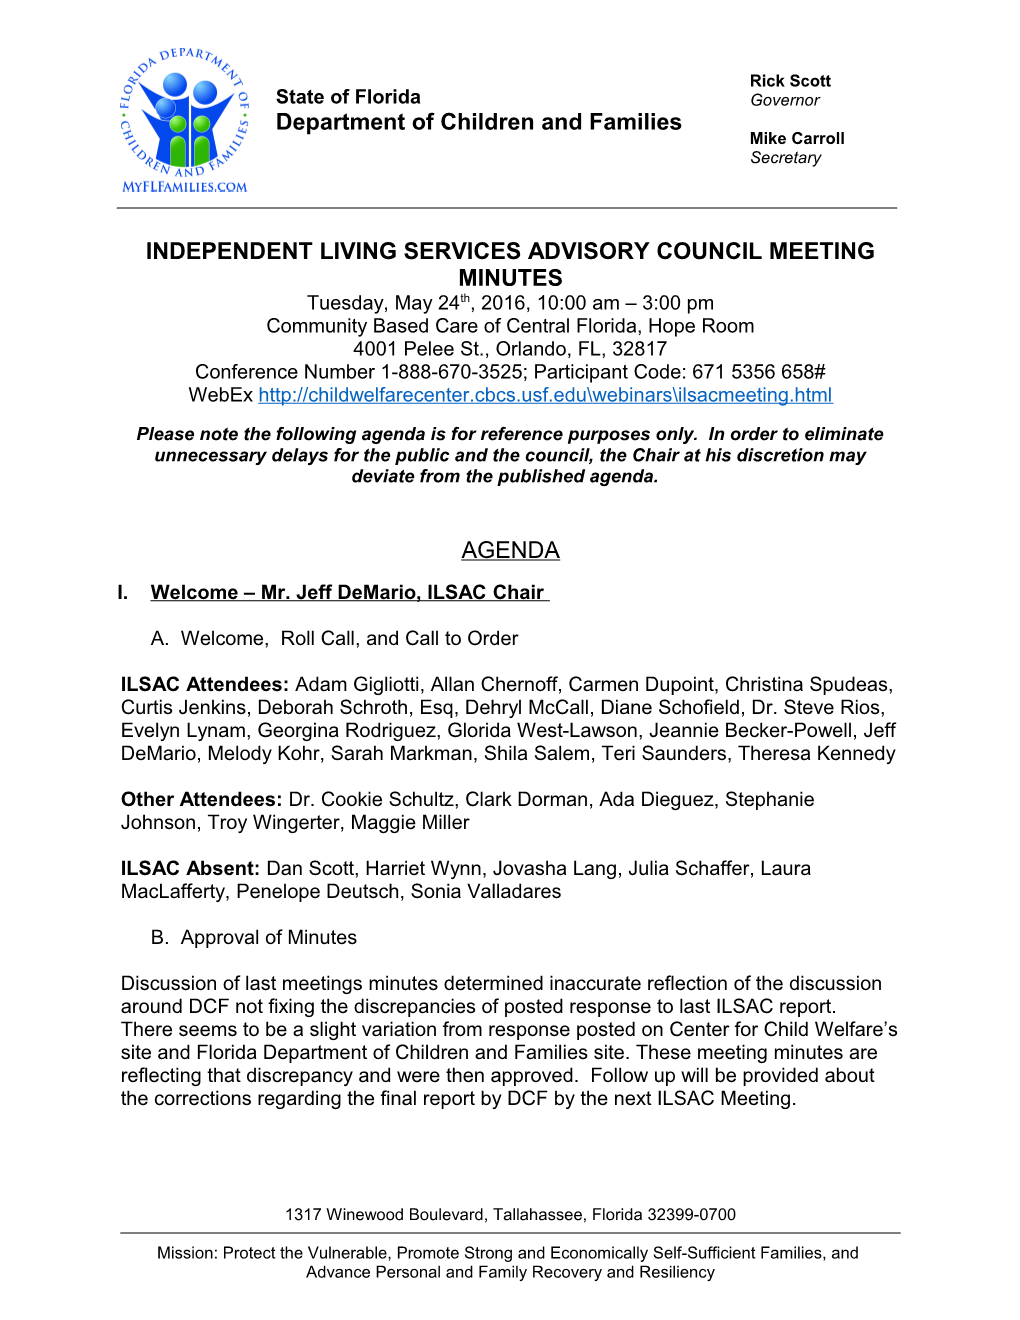 Independent Living Services Advisory Council Meeting Minutes